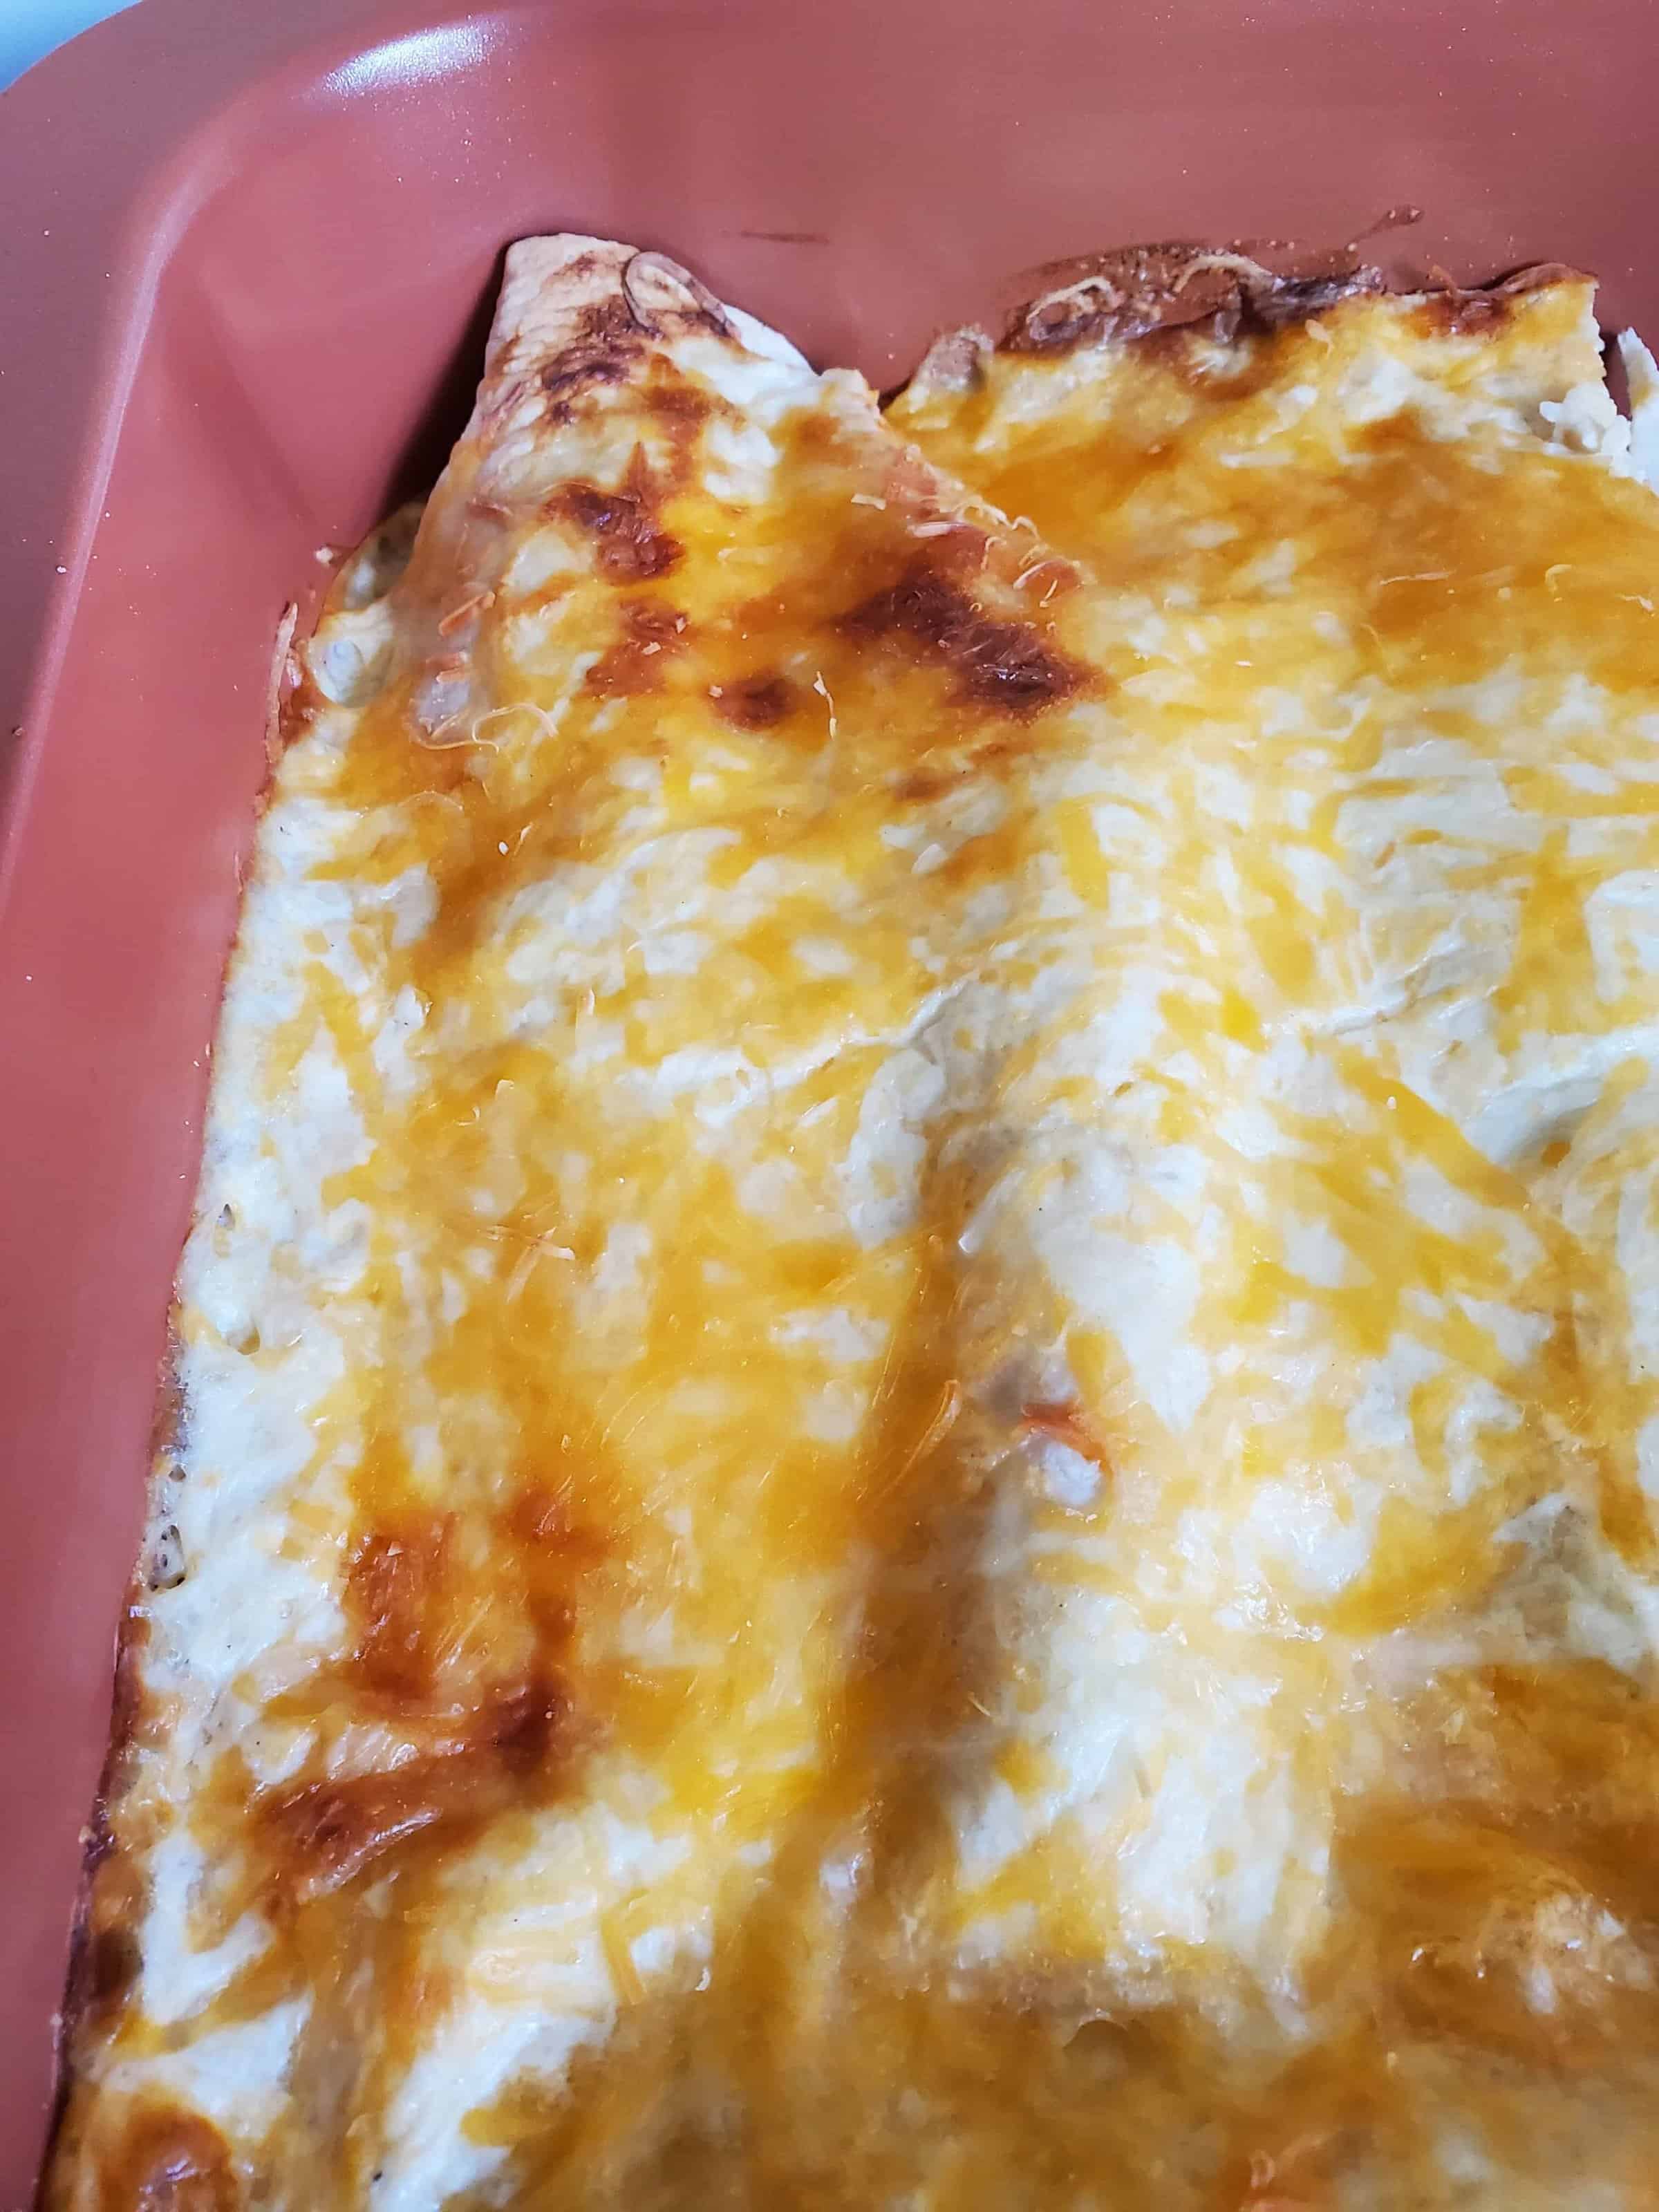 #ad @HpHood Sour Cream Chicken Enchiladas~ Creamy chicken and cheese enchiladas with a flavorful sour cream white sauce is a simple and delicious meal that comes together quickly. #TouchOfHood #IC #mooreorlesscooking #enchiladas #sourcream via @Mooreorlesscook